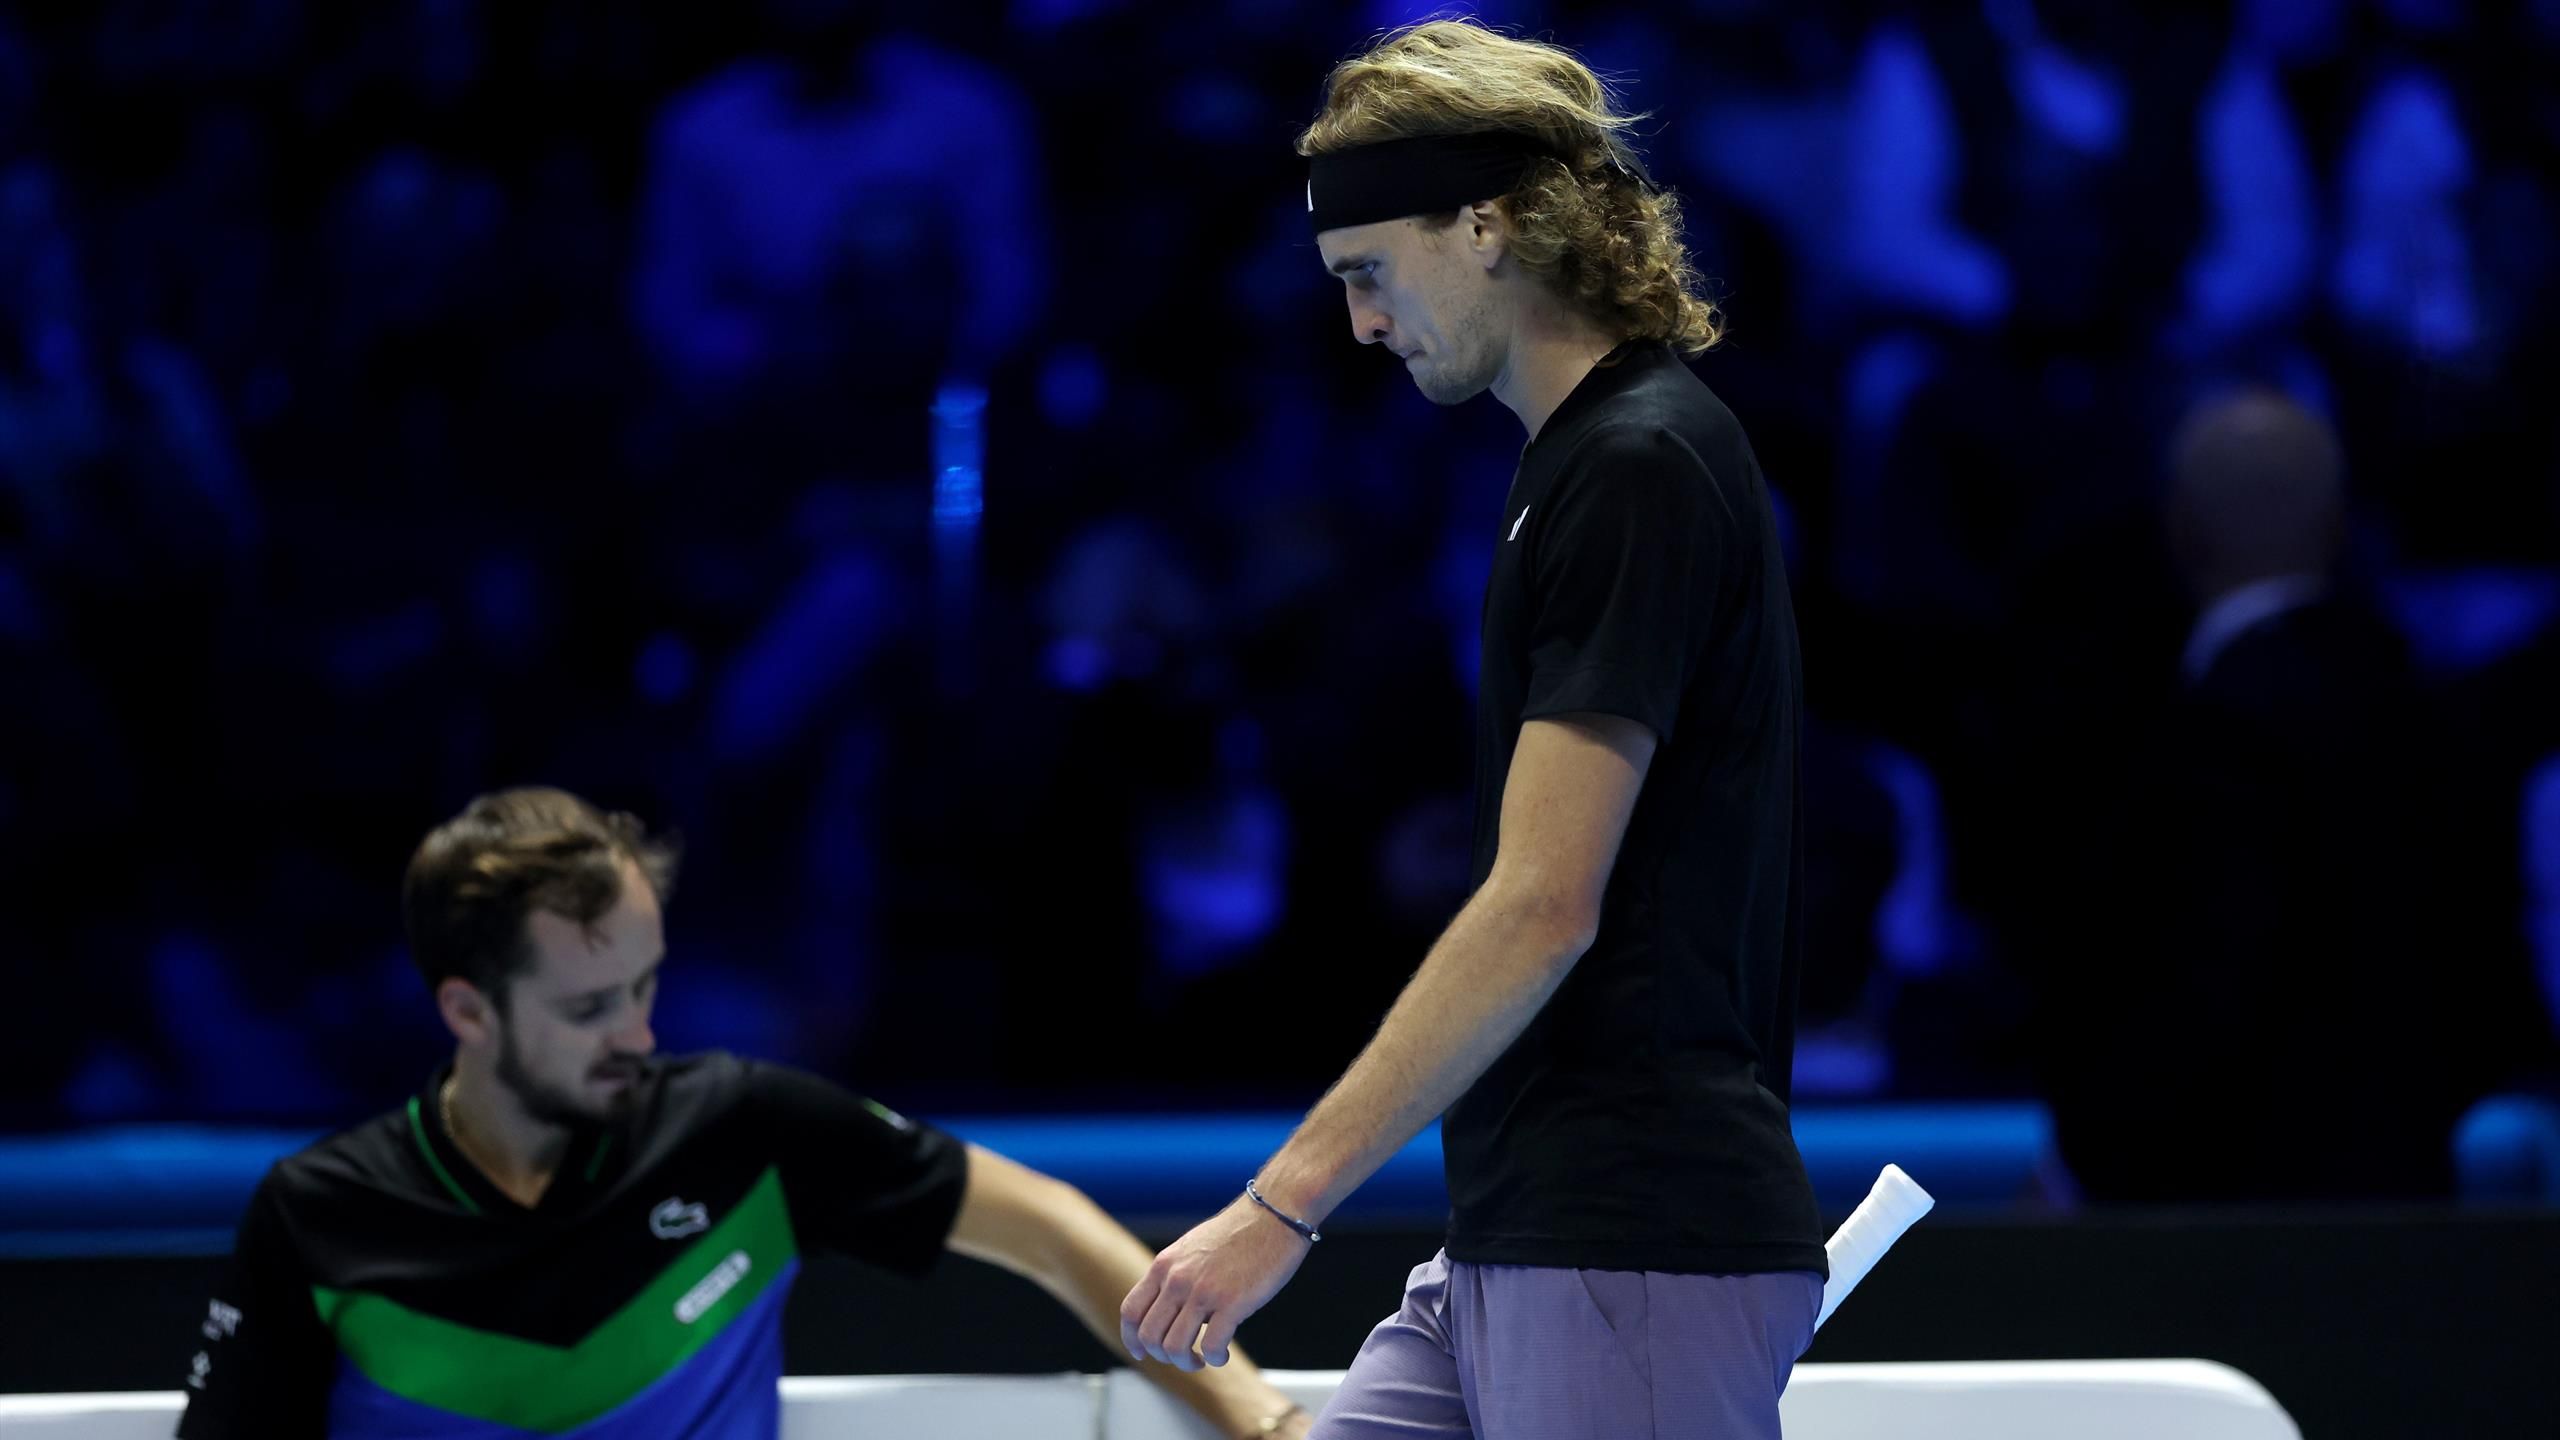 ATP Finals: Alexander Zverev bites his teeth at fearsome rival Daniil Medvedev and has to worry about the semi-finals